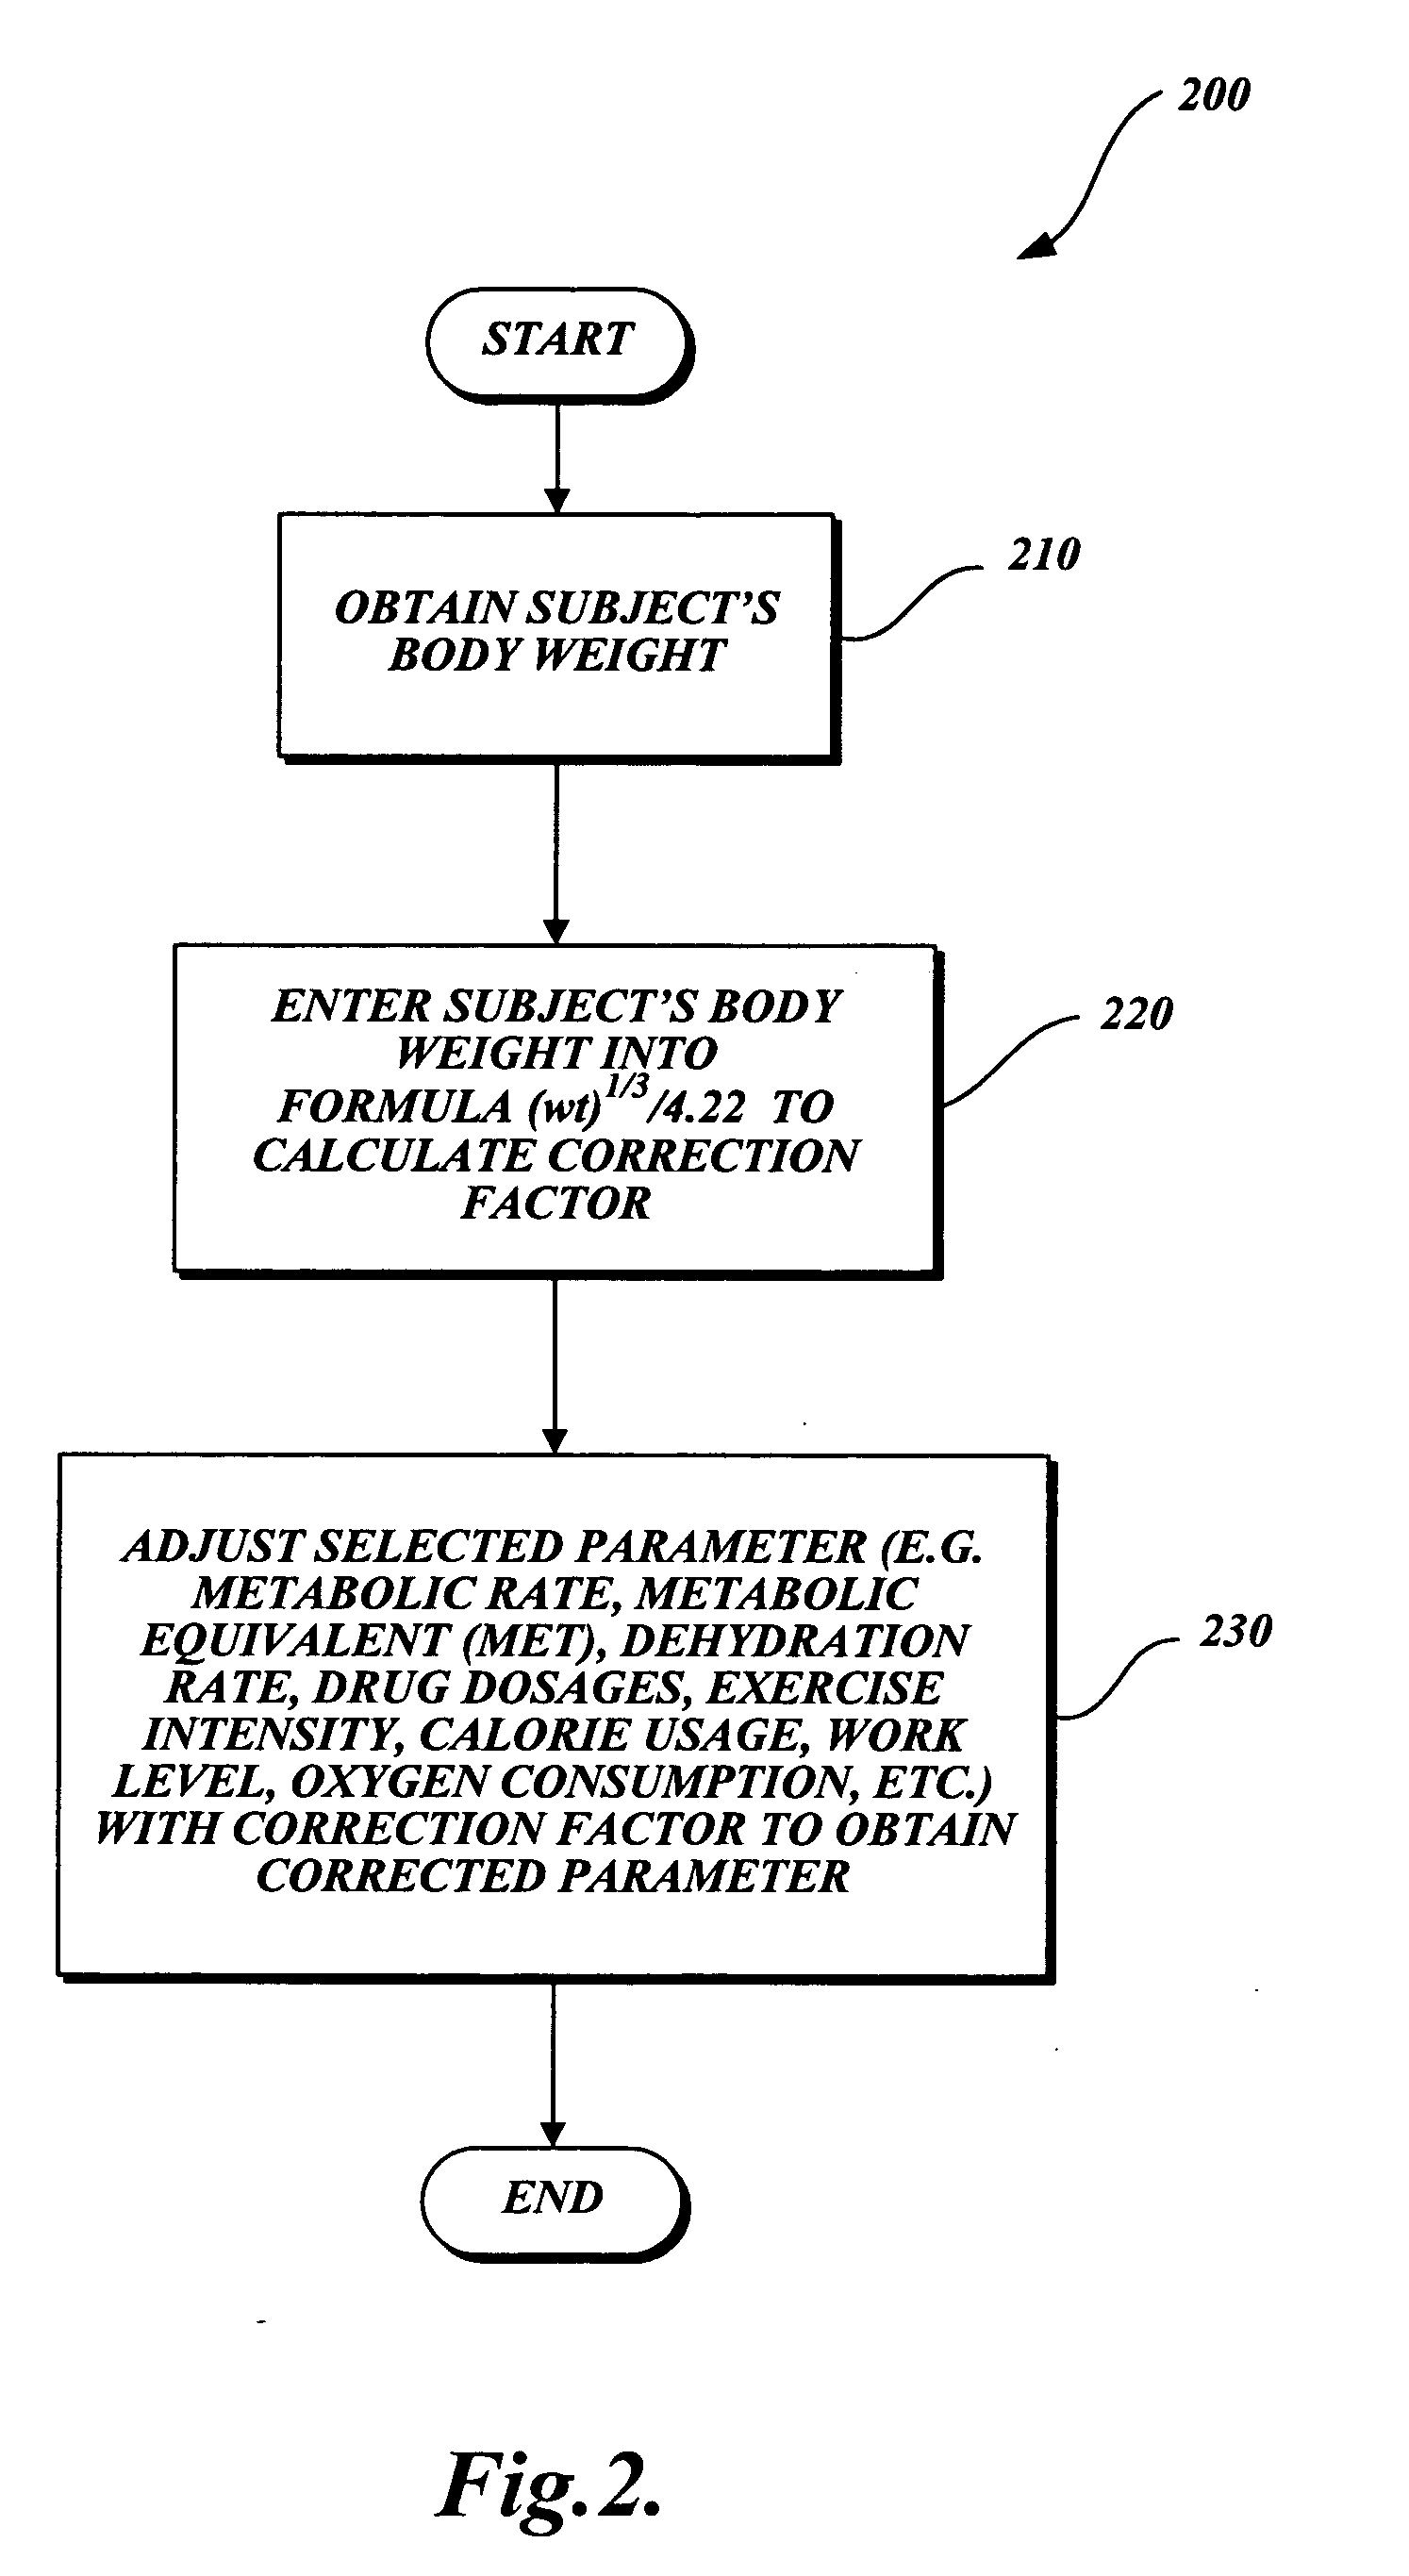 Method for adjusting metabolic related parameters according to a subject's body weight